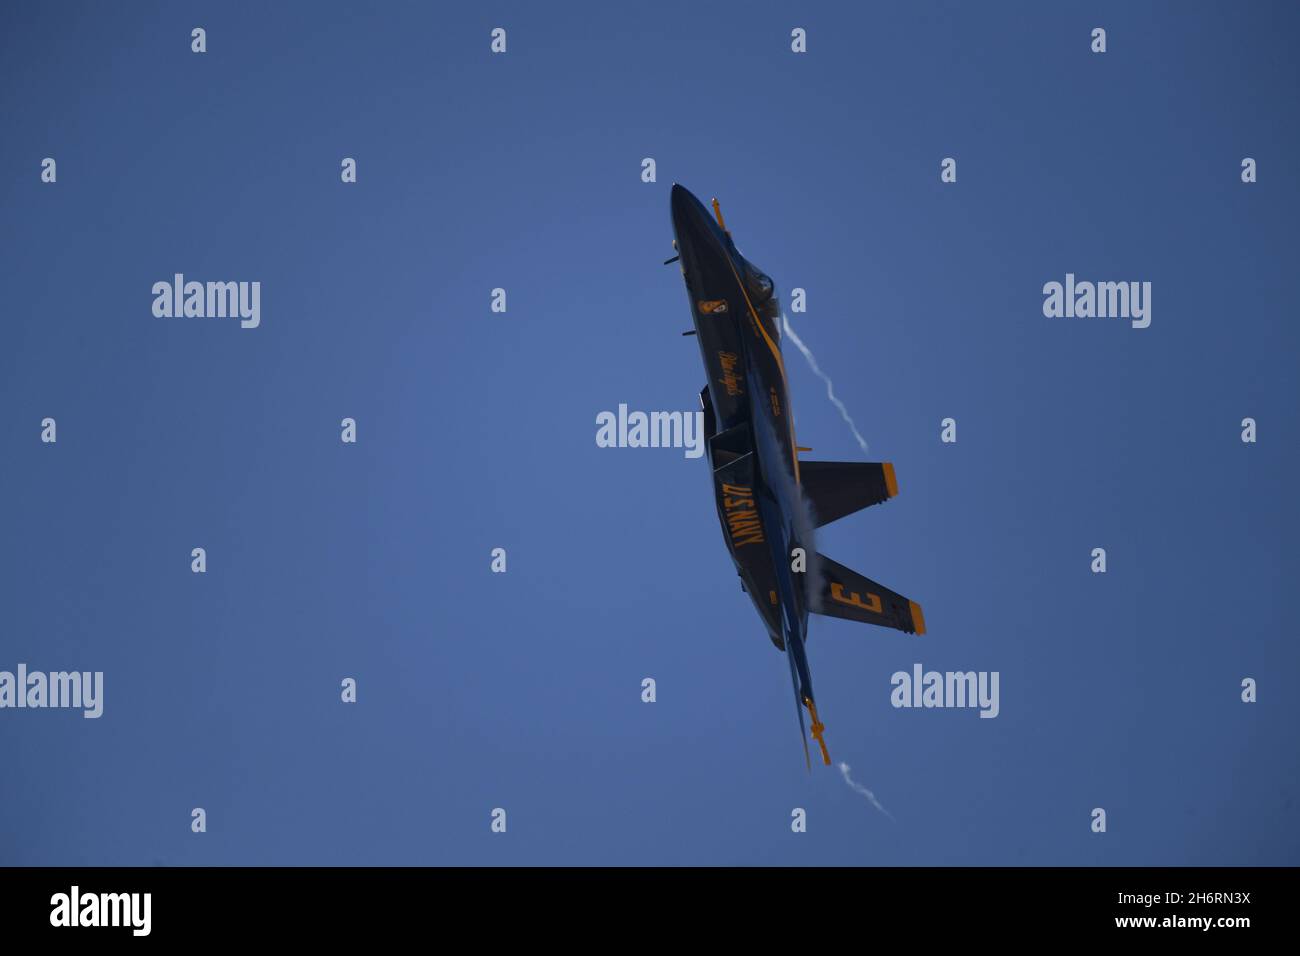 Blue Angel 3 pulls vapor while pulling away after a split of the diamond formation Stock Photo